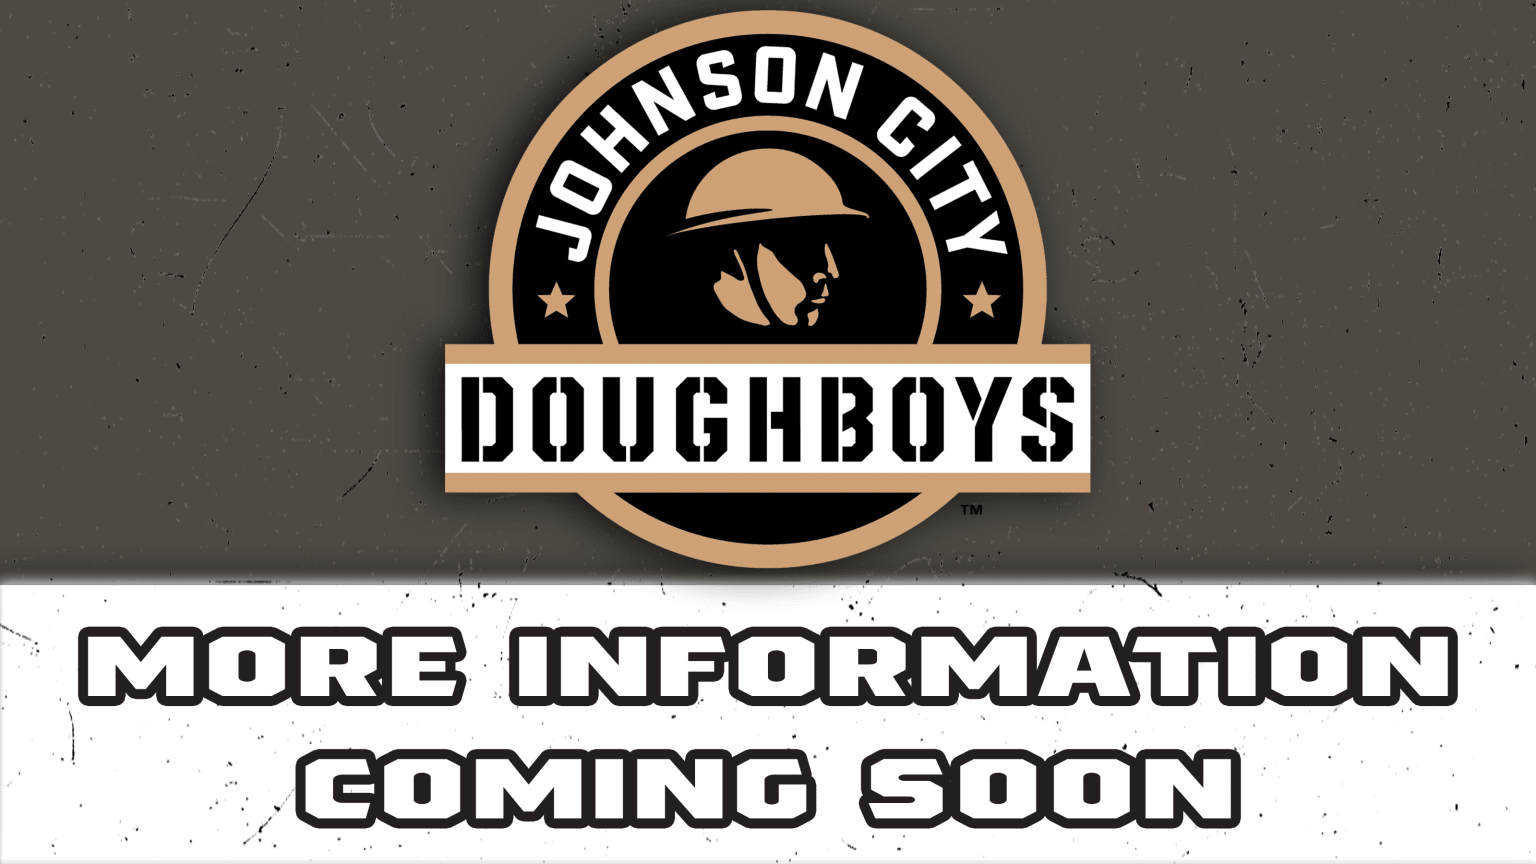 Promotional Schedule Johnson City Doughboys